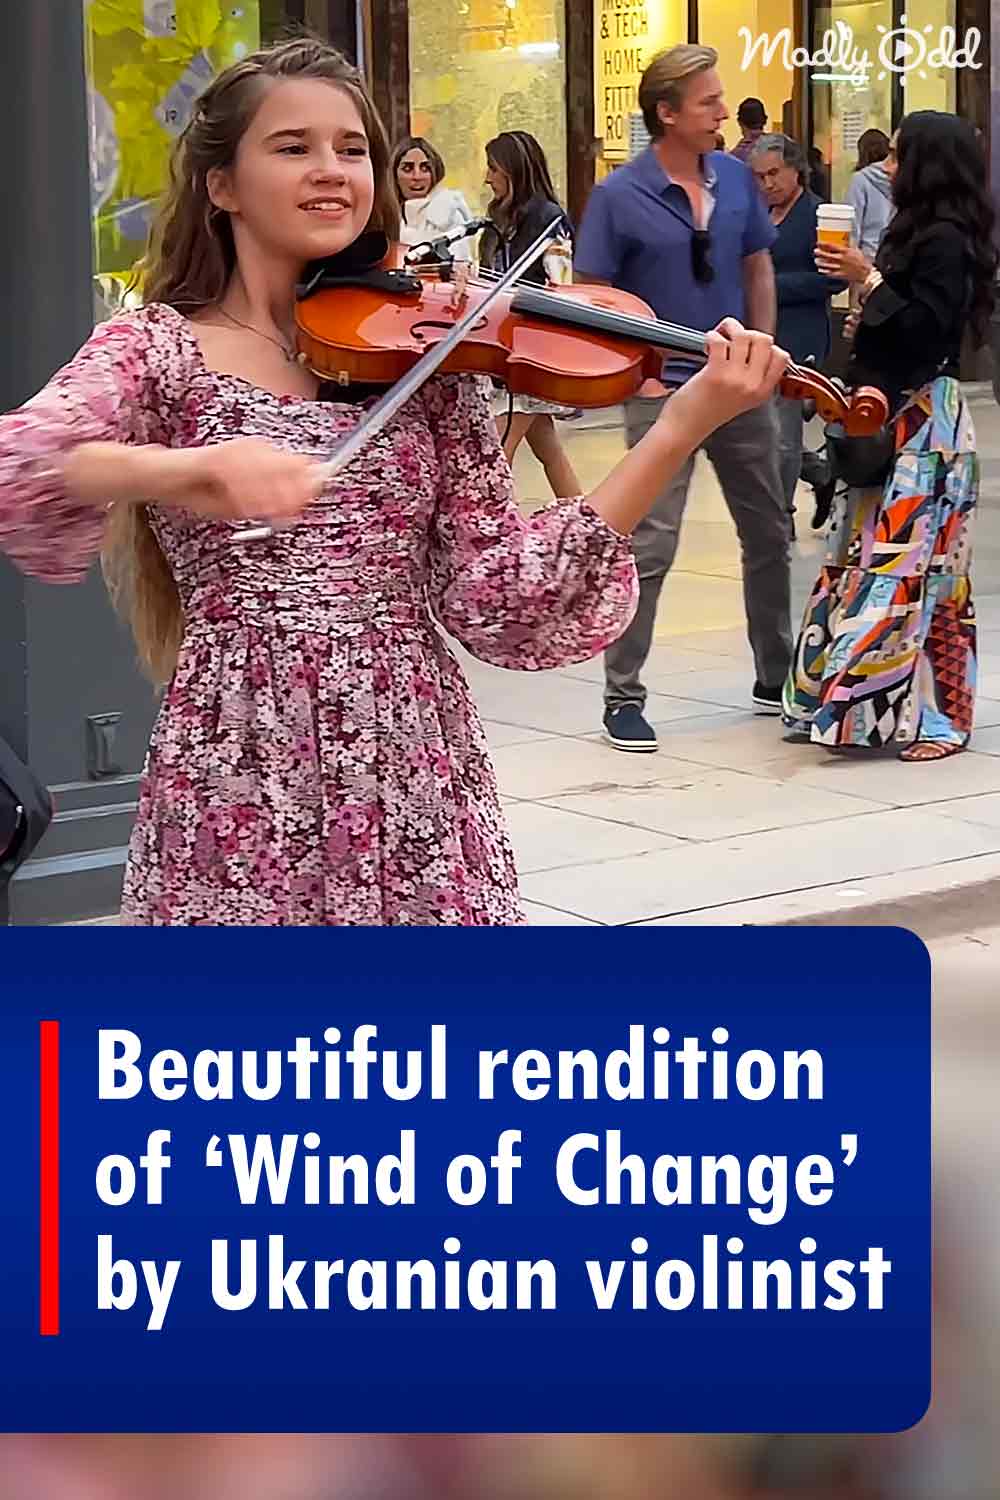 Beautiful rendition of ‘Wind of Change’ by Ukranian violinist